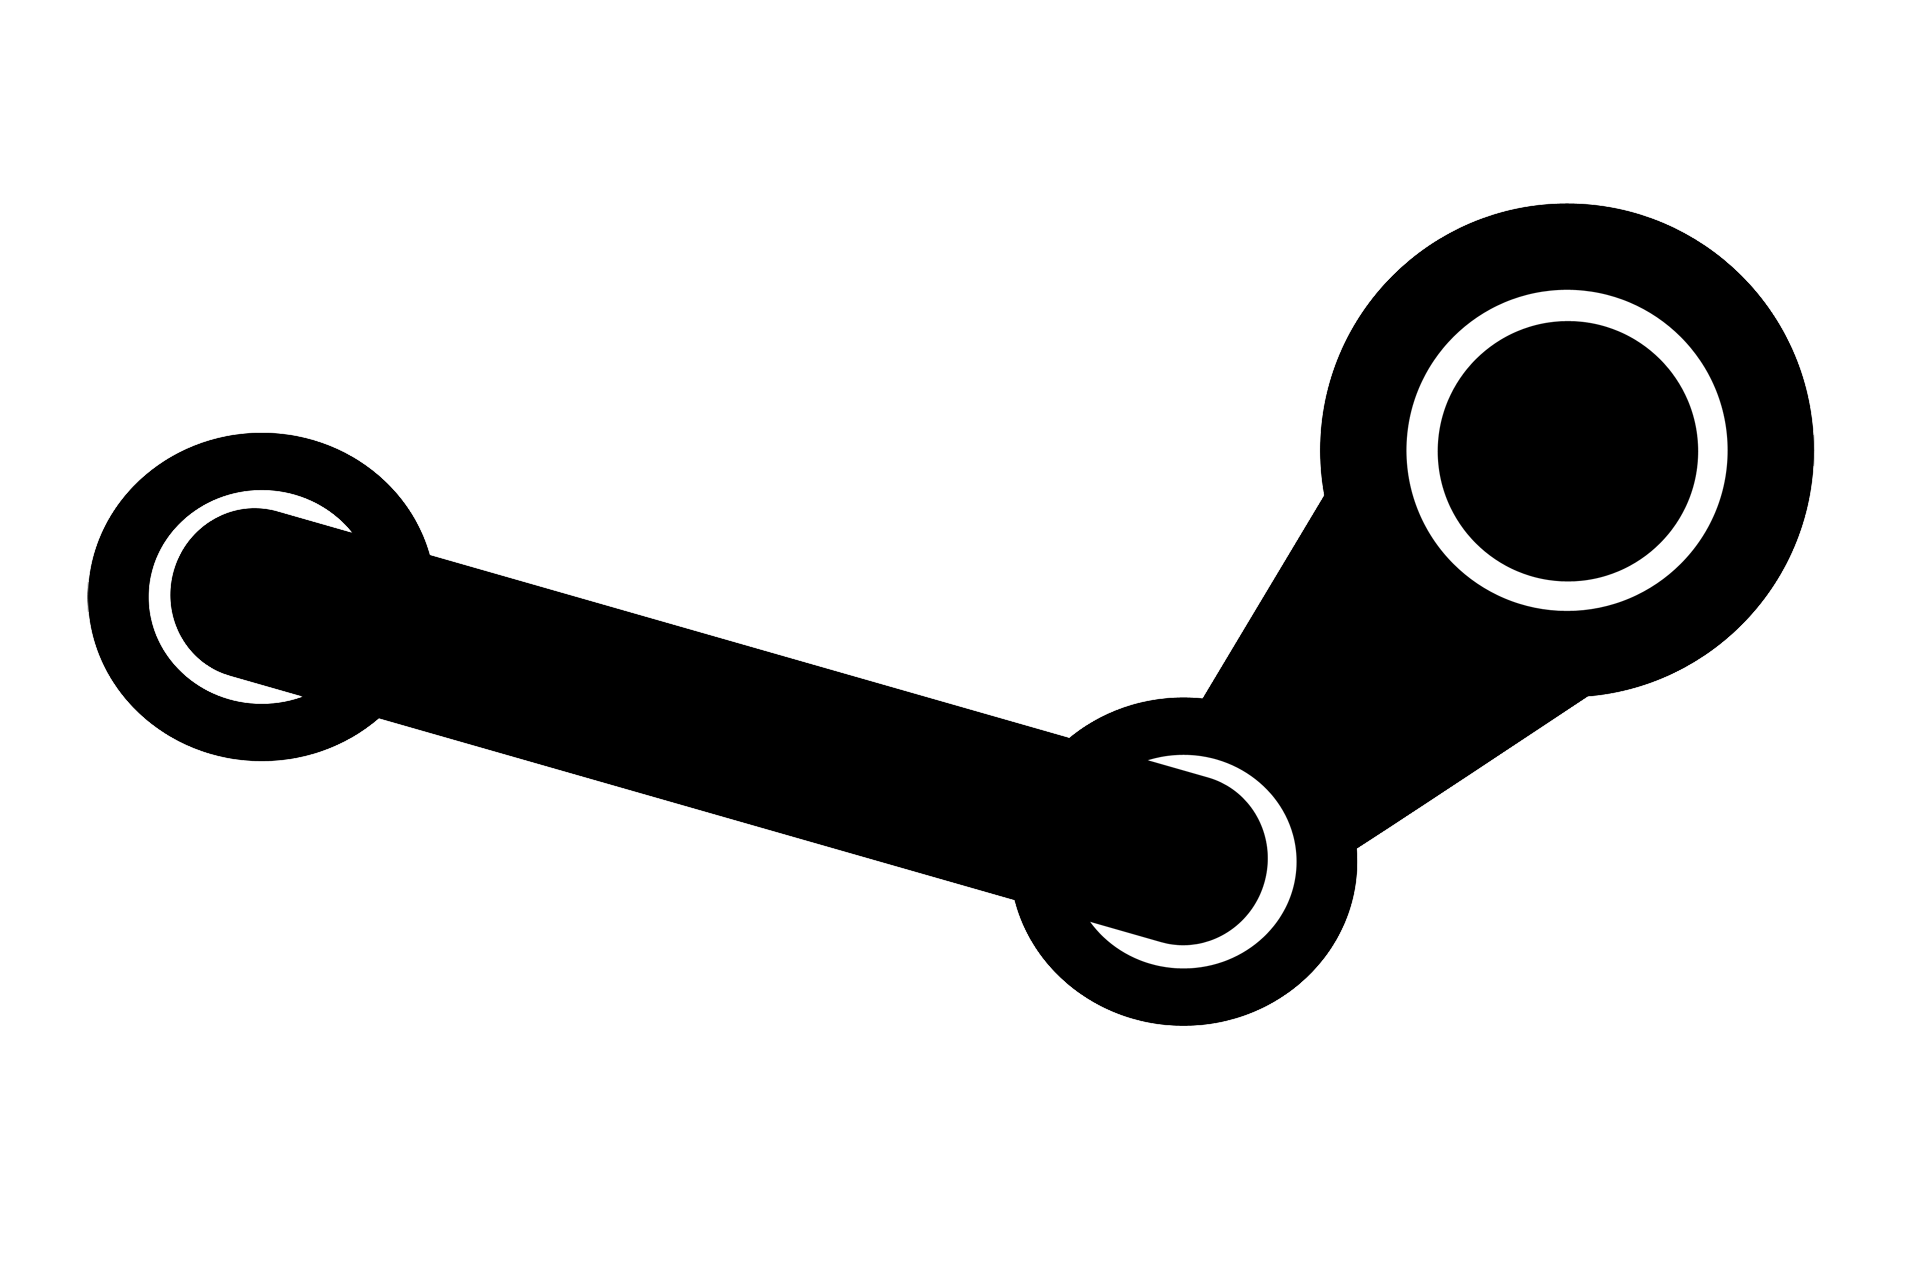 Steam Sales Leaked! - 2013 Fall and Holiday Sale Dates Revealed!